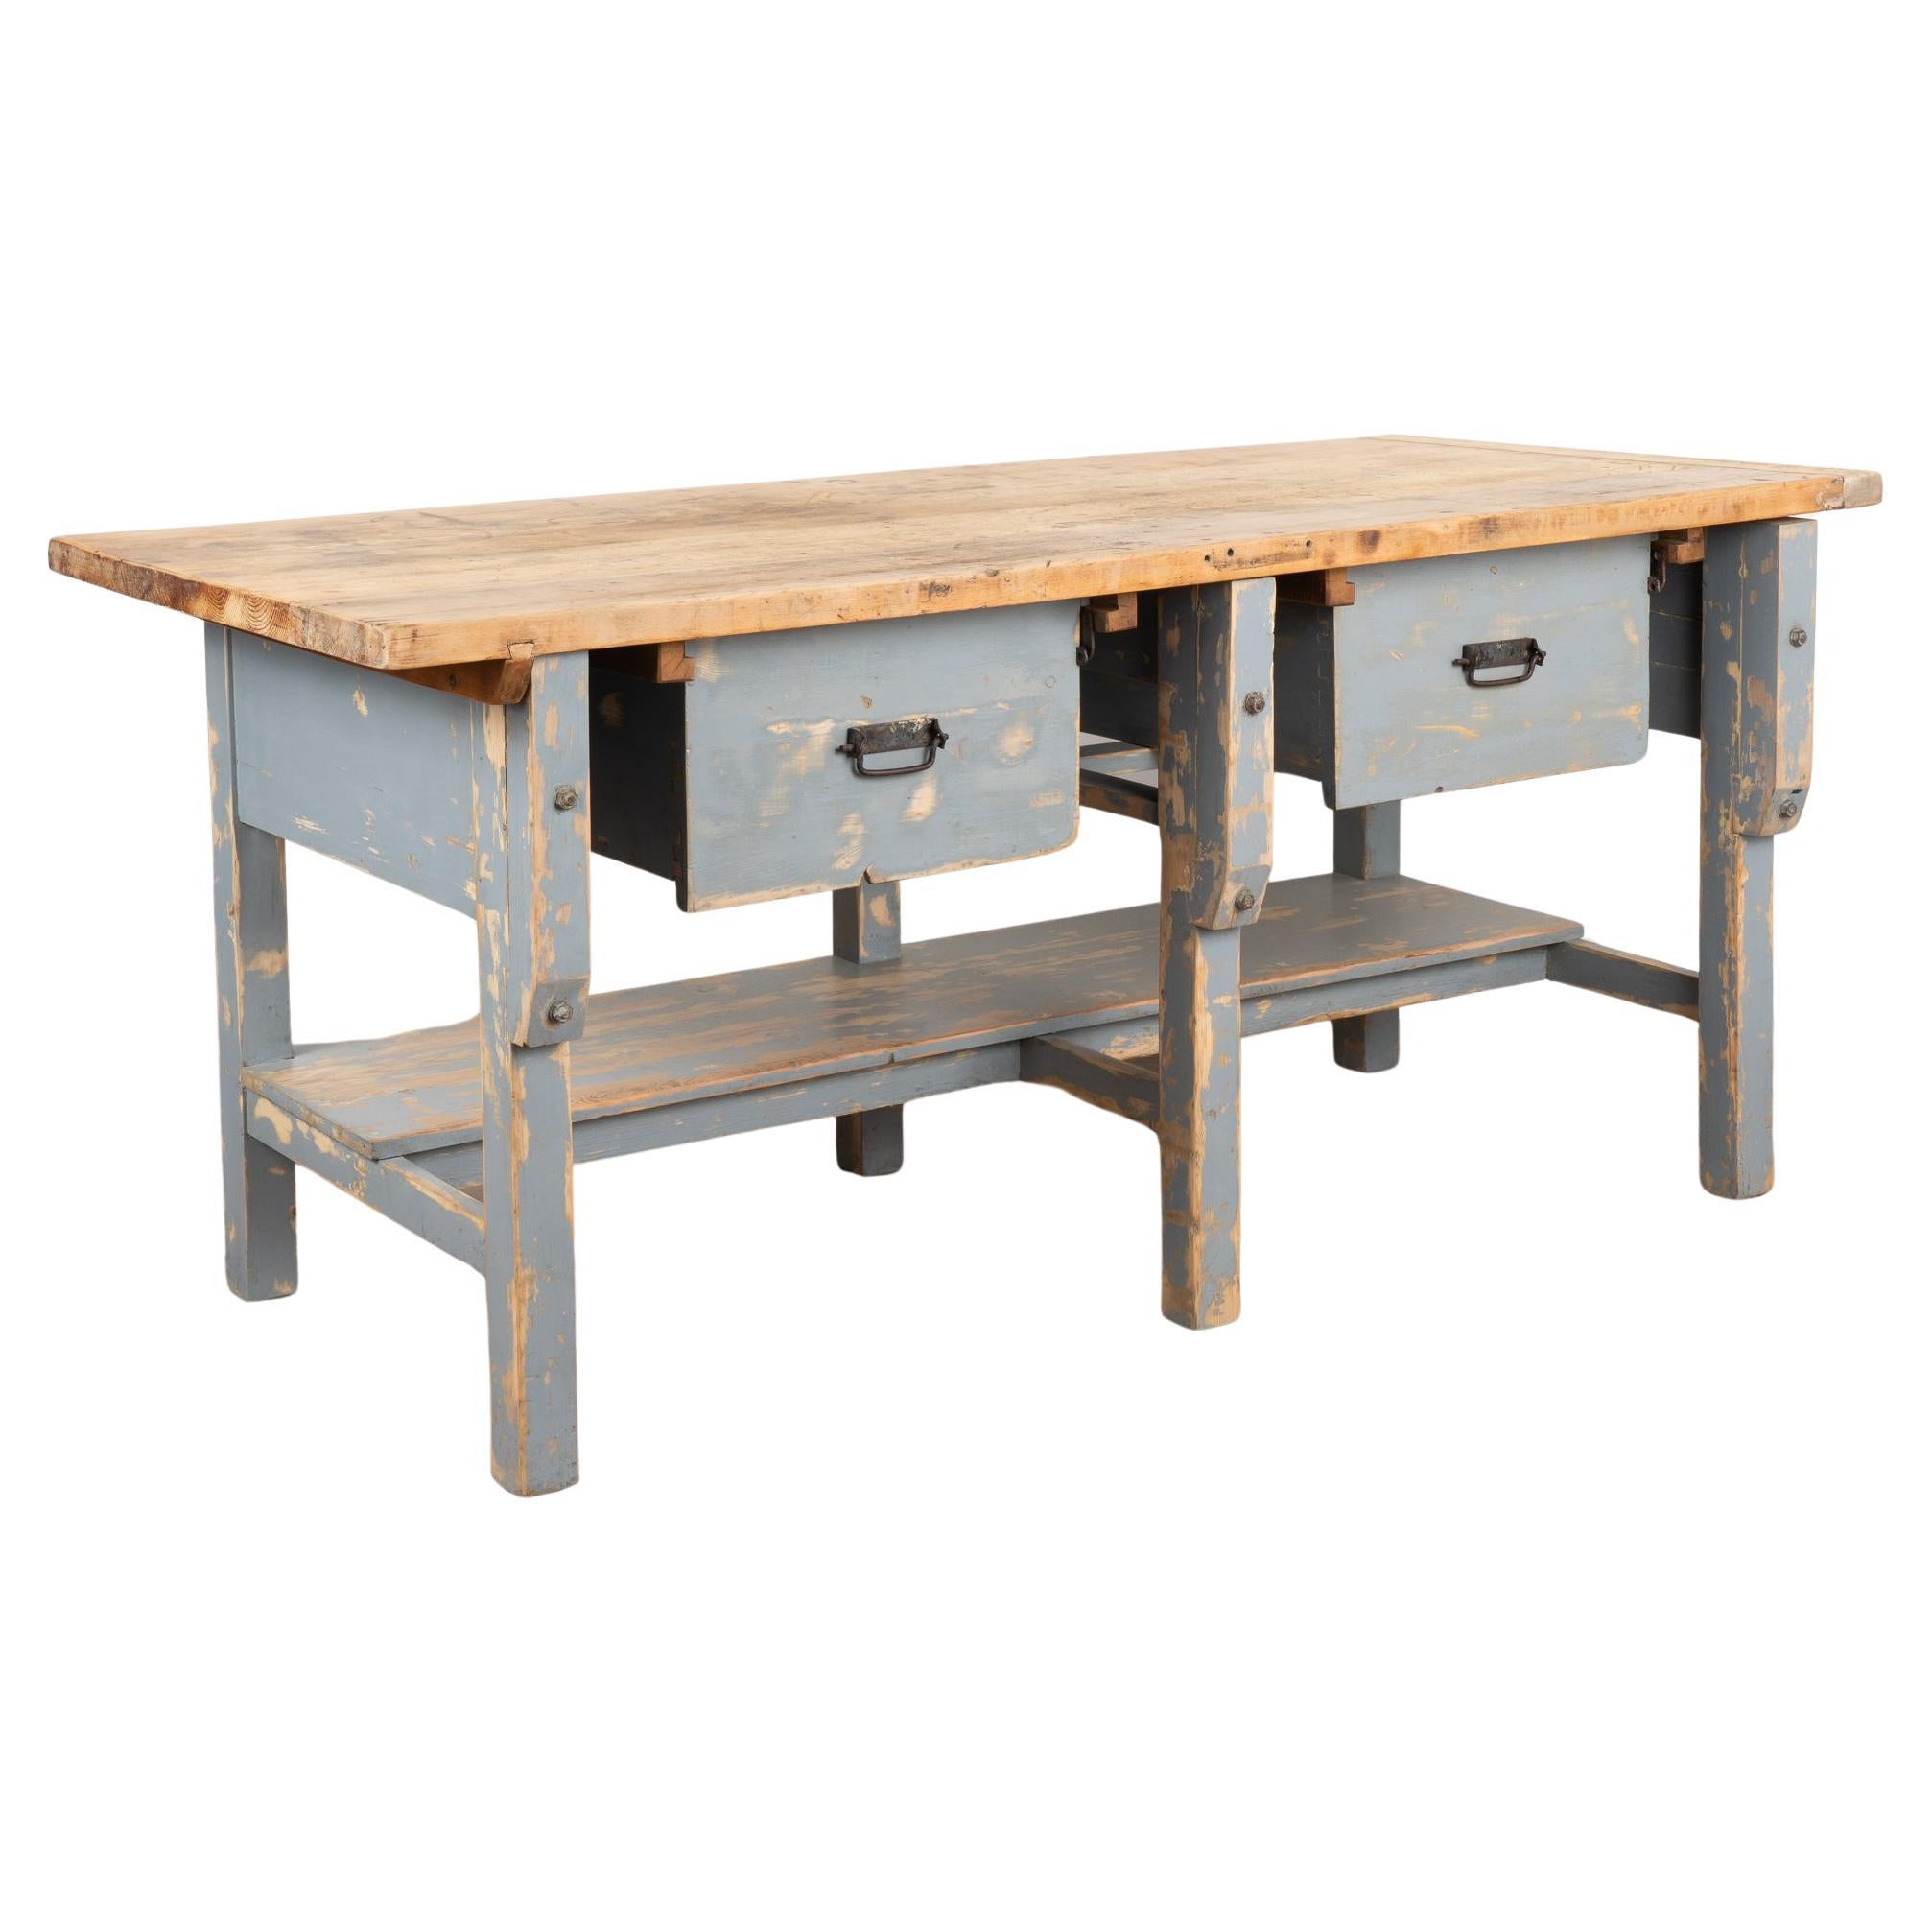 Large Blue Rustic Work Table Kitchen Island With 2 Drawers and Shelf, Circa 1890 For Sale